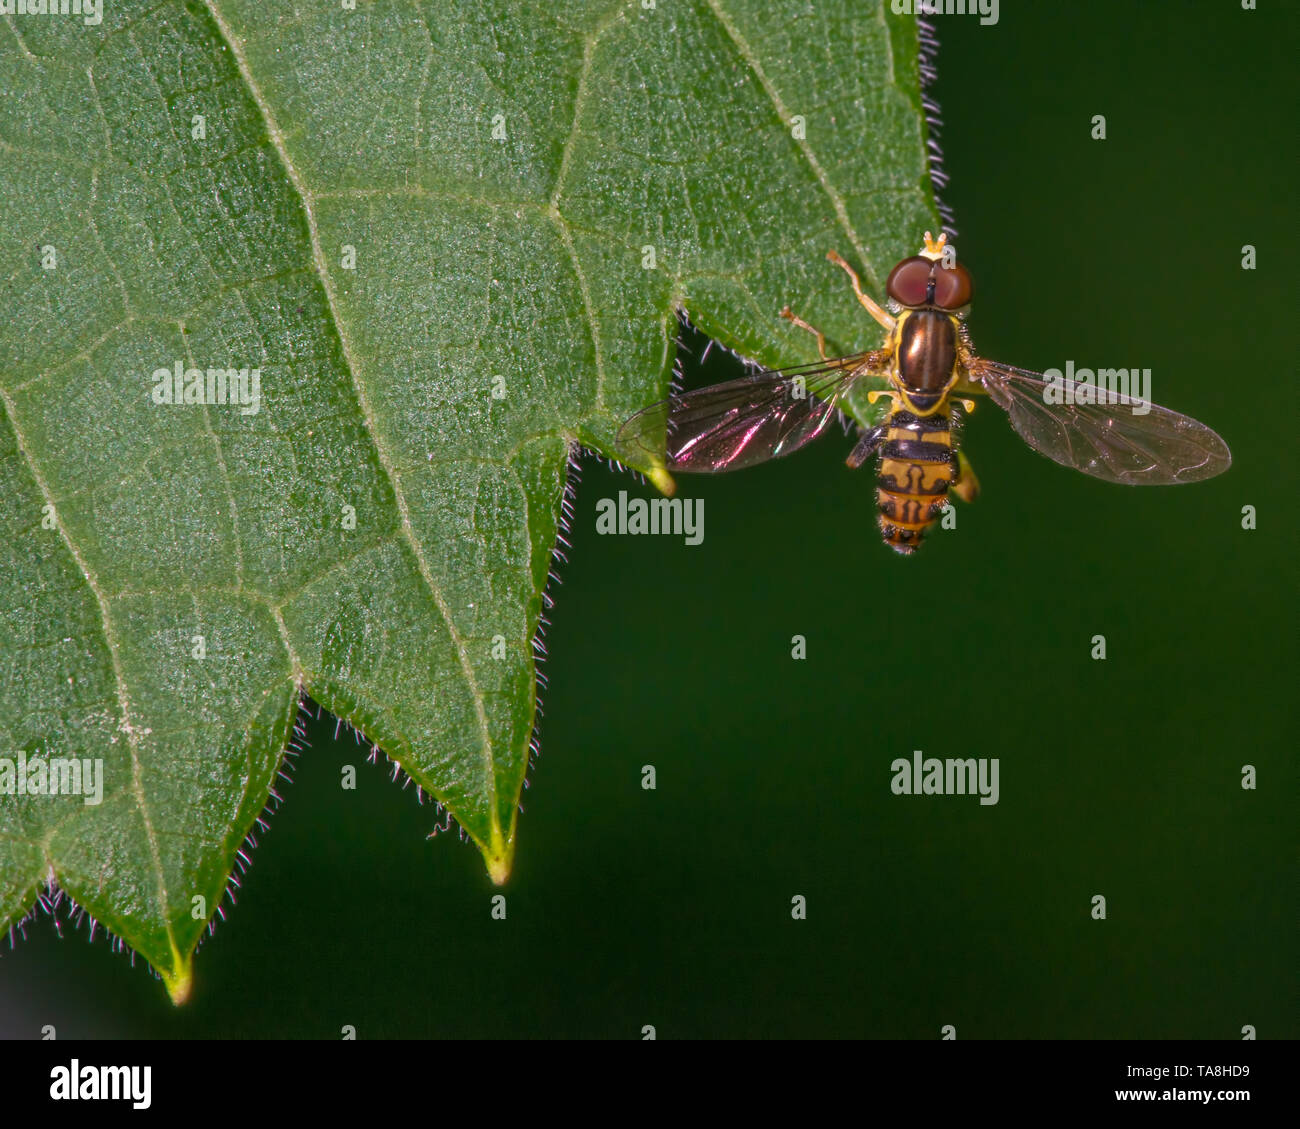 Macro detailed image of flower fly species on a green leaf - taken in Minnesota Stock Photo